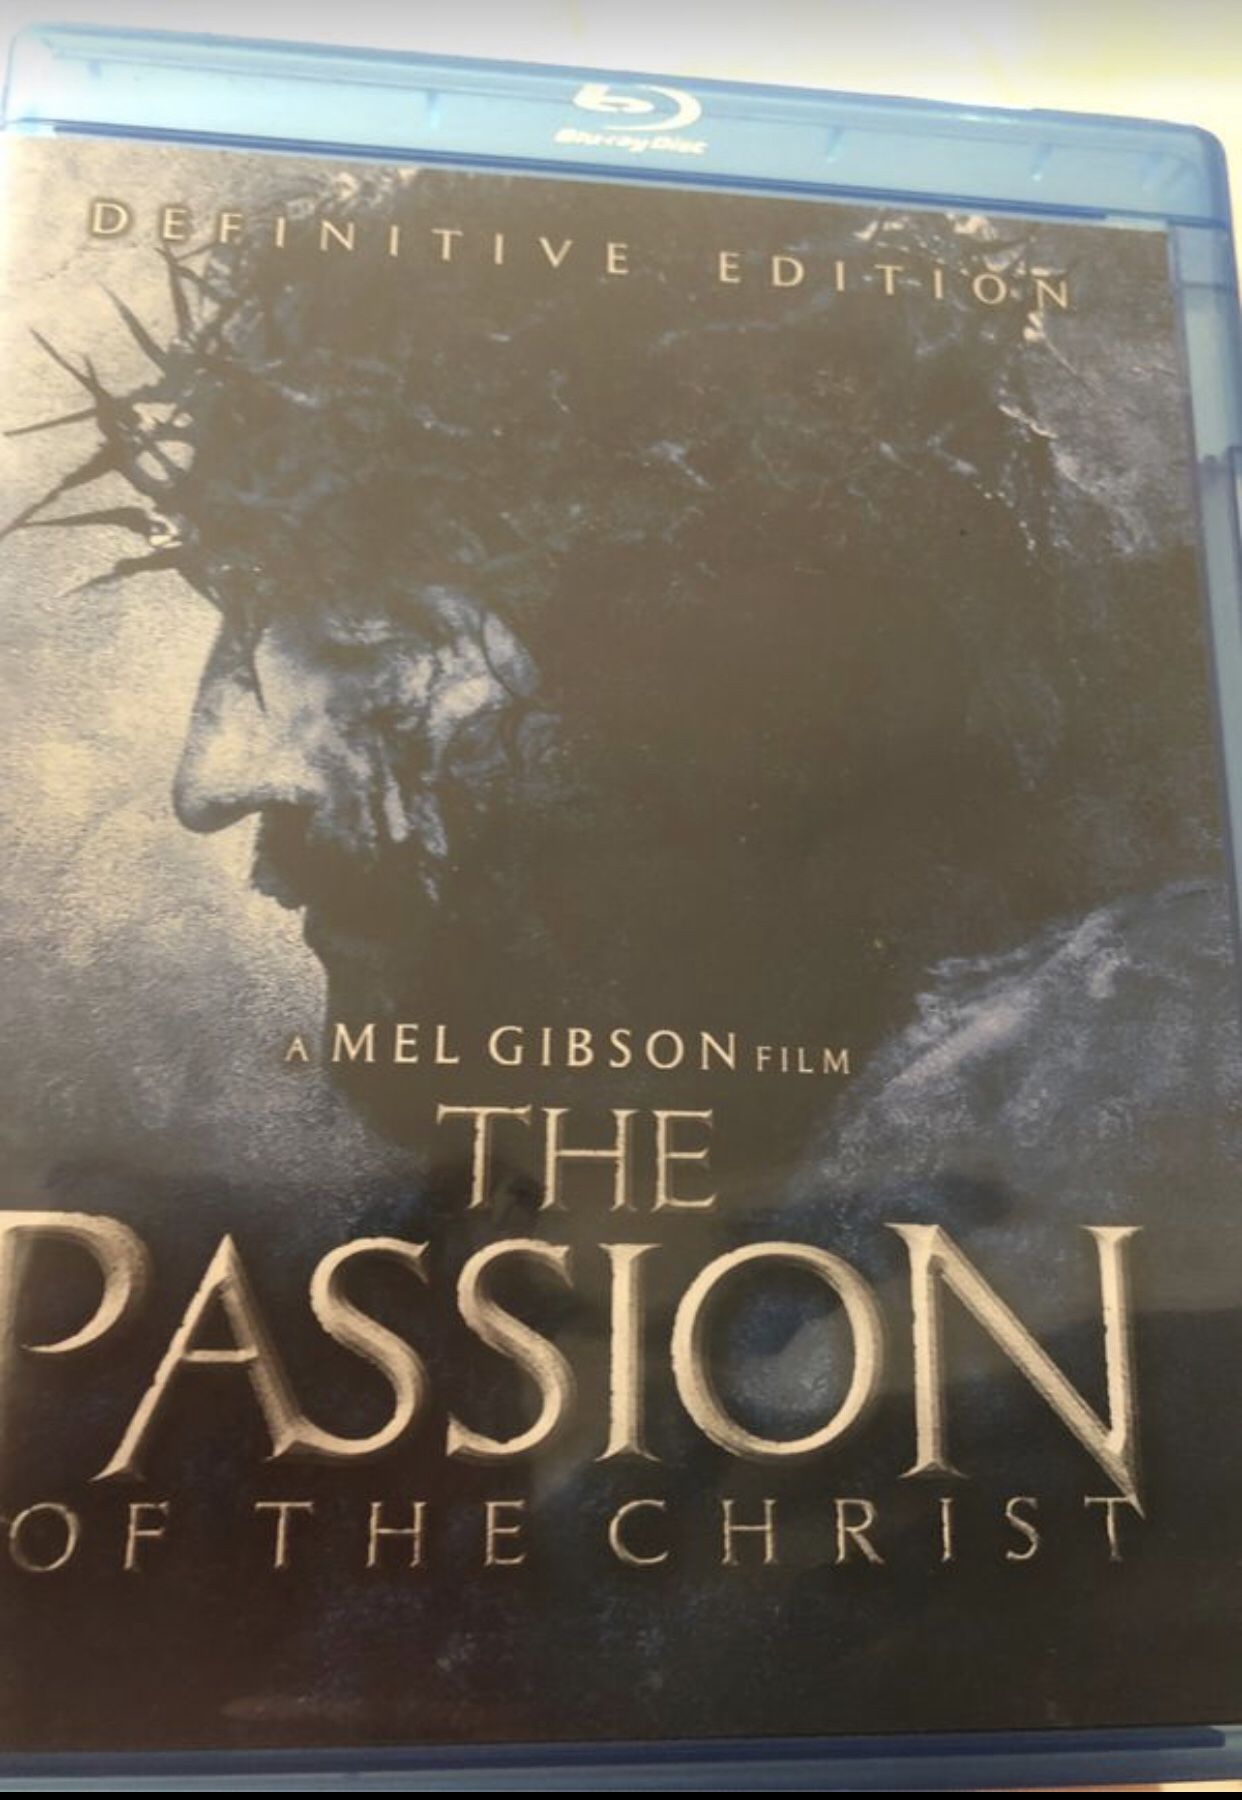 Blu ray-dvd-THE PASSION of the Christ ( a MEL GIBSON film)